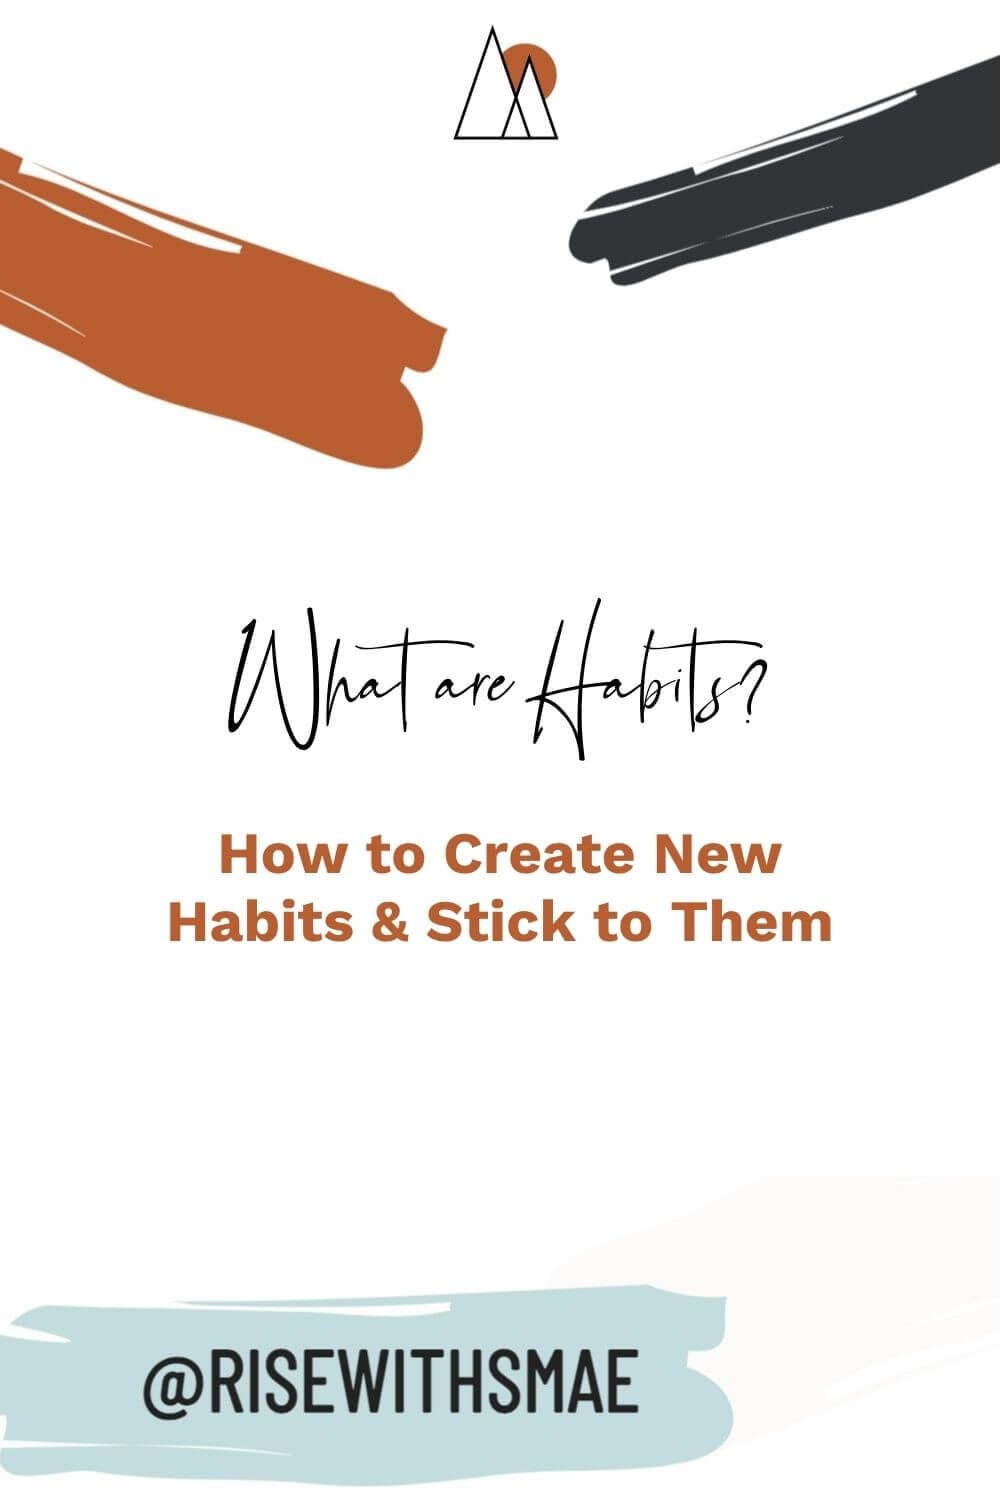 What Are Habits? How to Create New Habits and Stick to Them